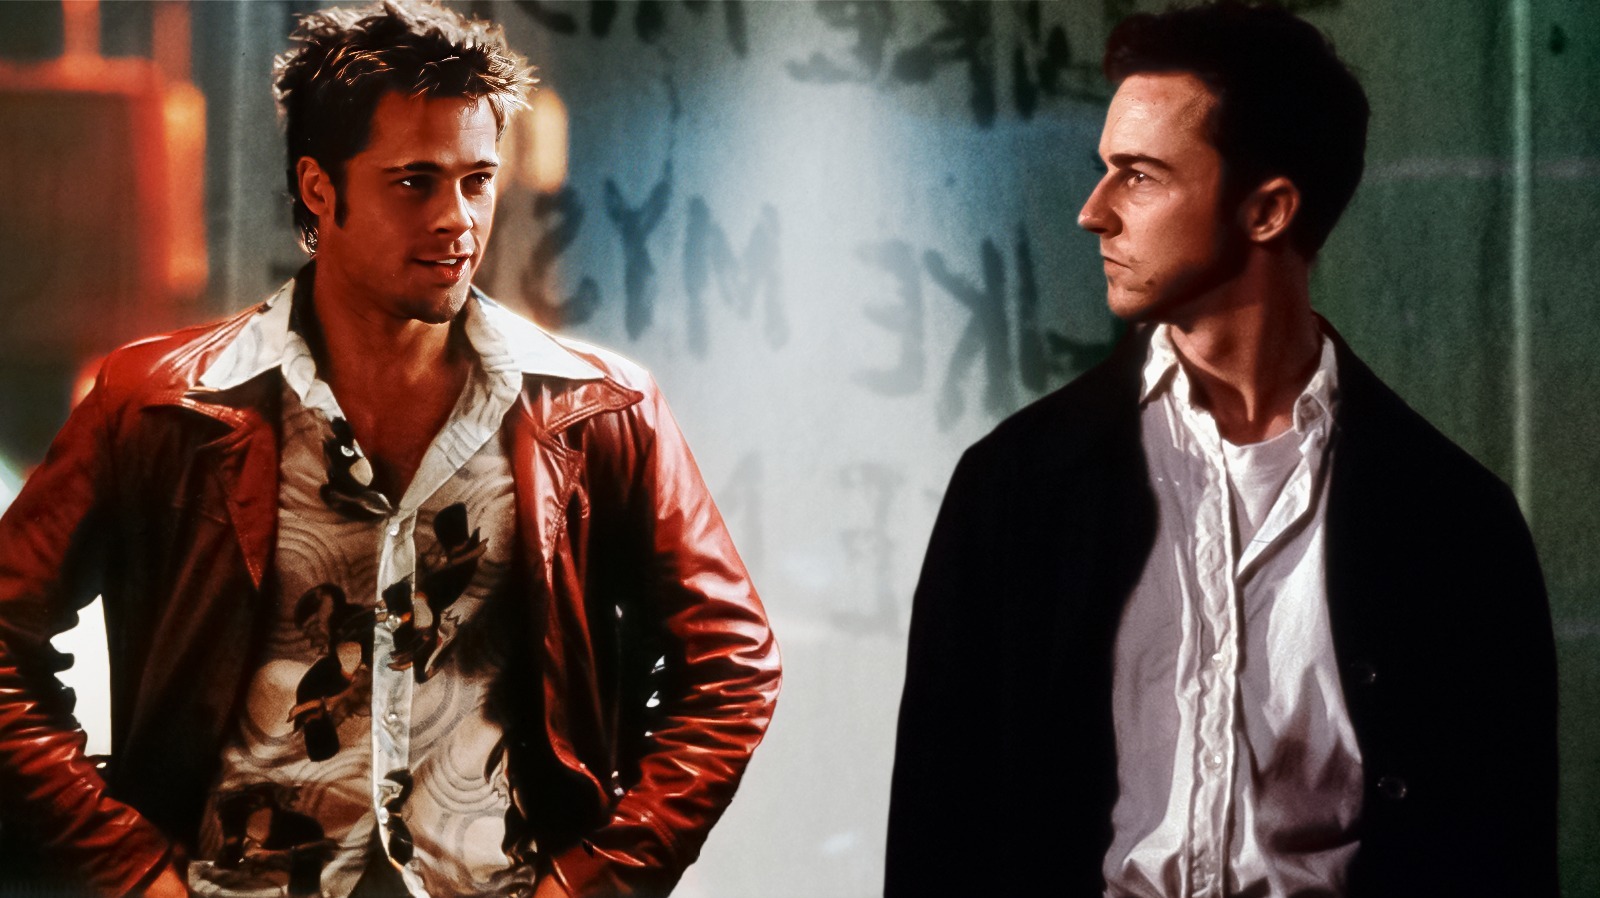 David Fincher's Fight Club Was A Warning, Not A Call To Arms